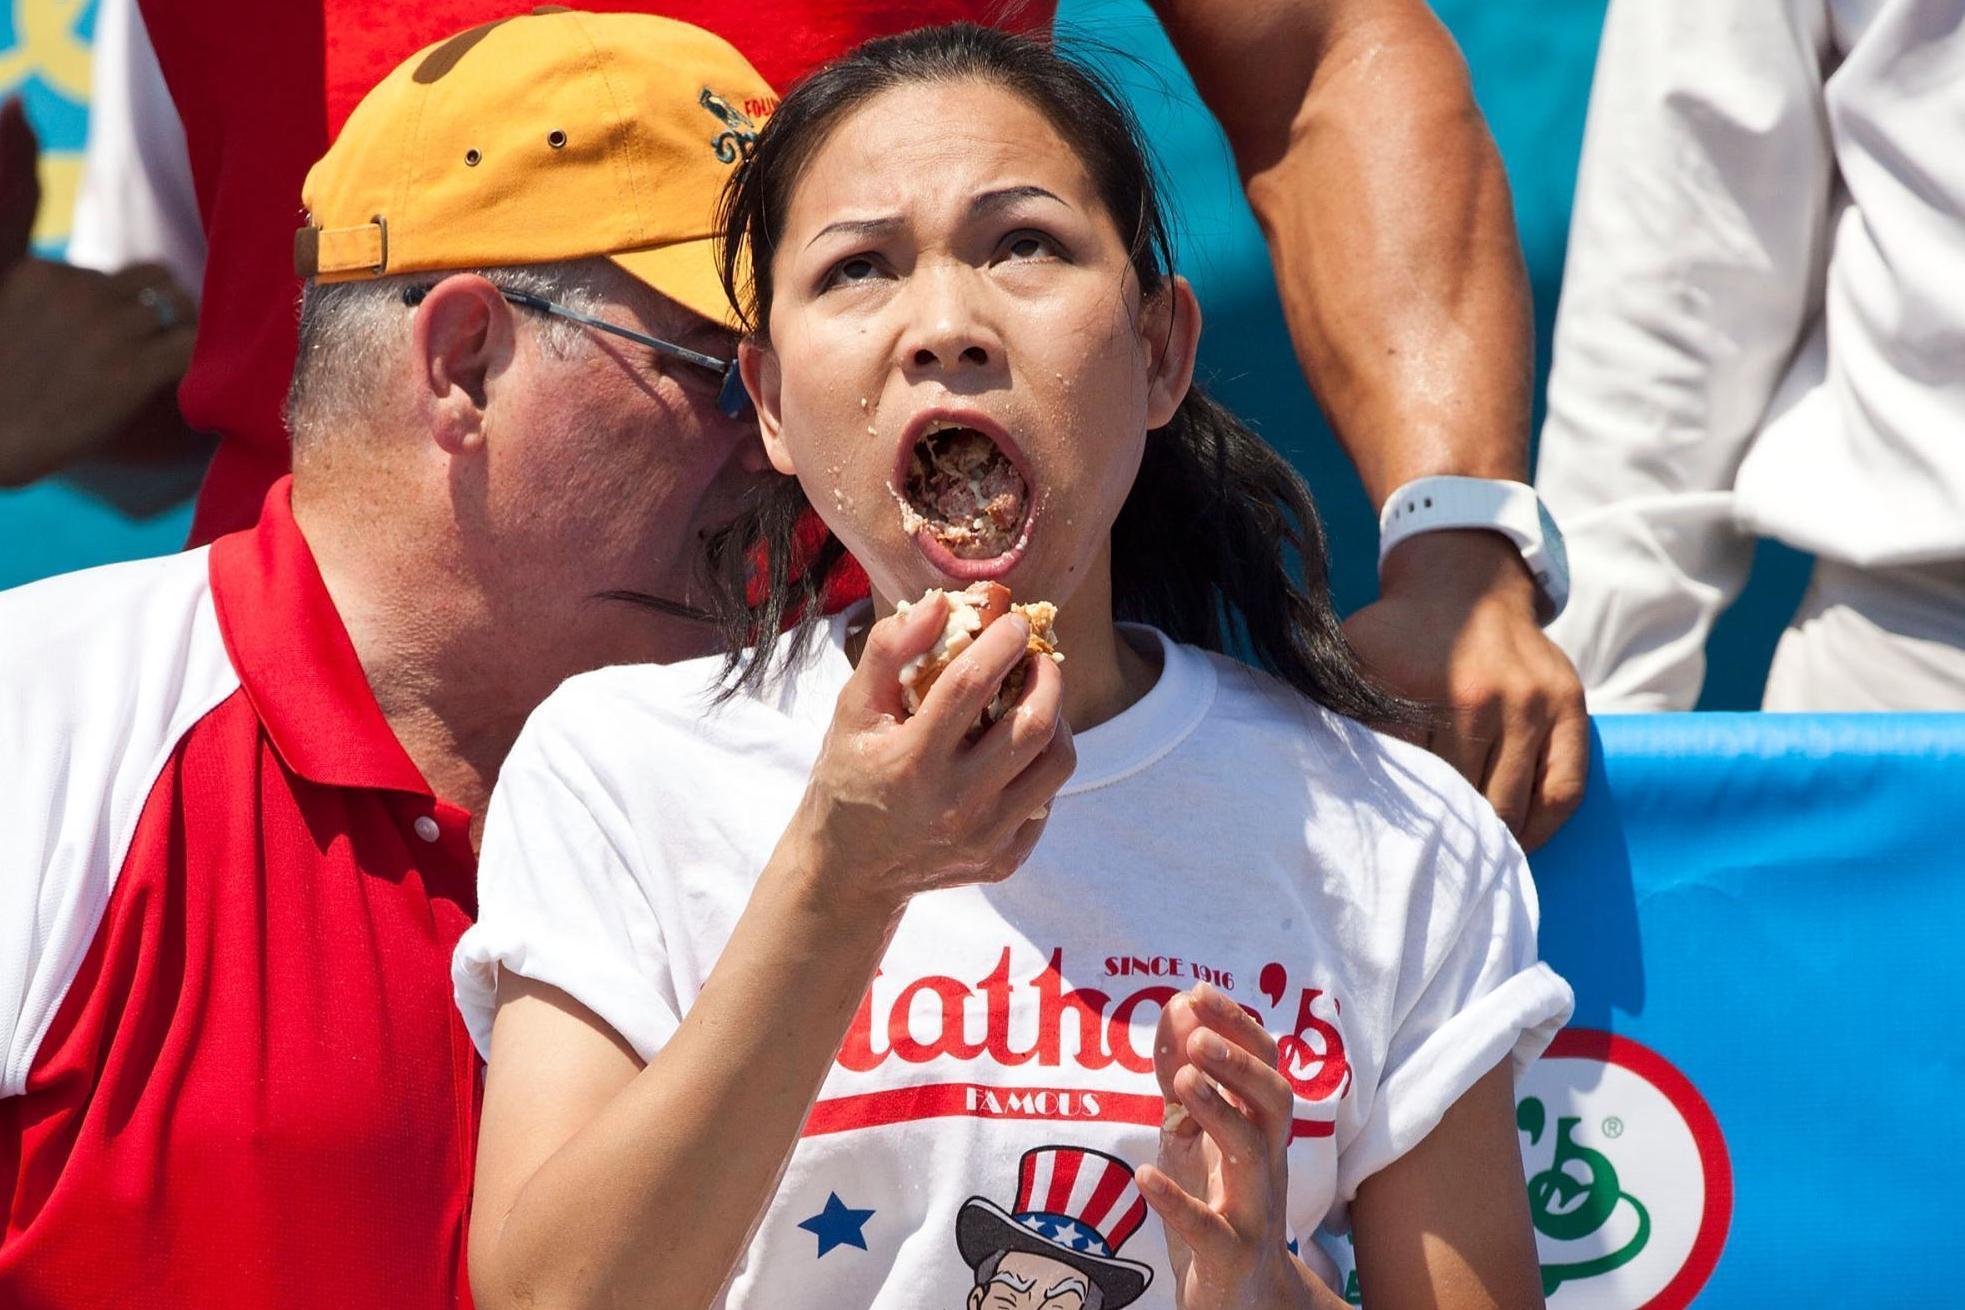 Competitive eater Sonya Thomas participating in 2012